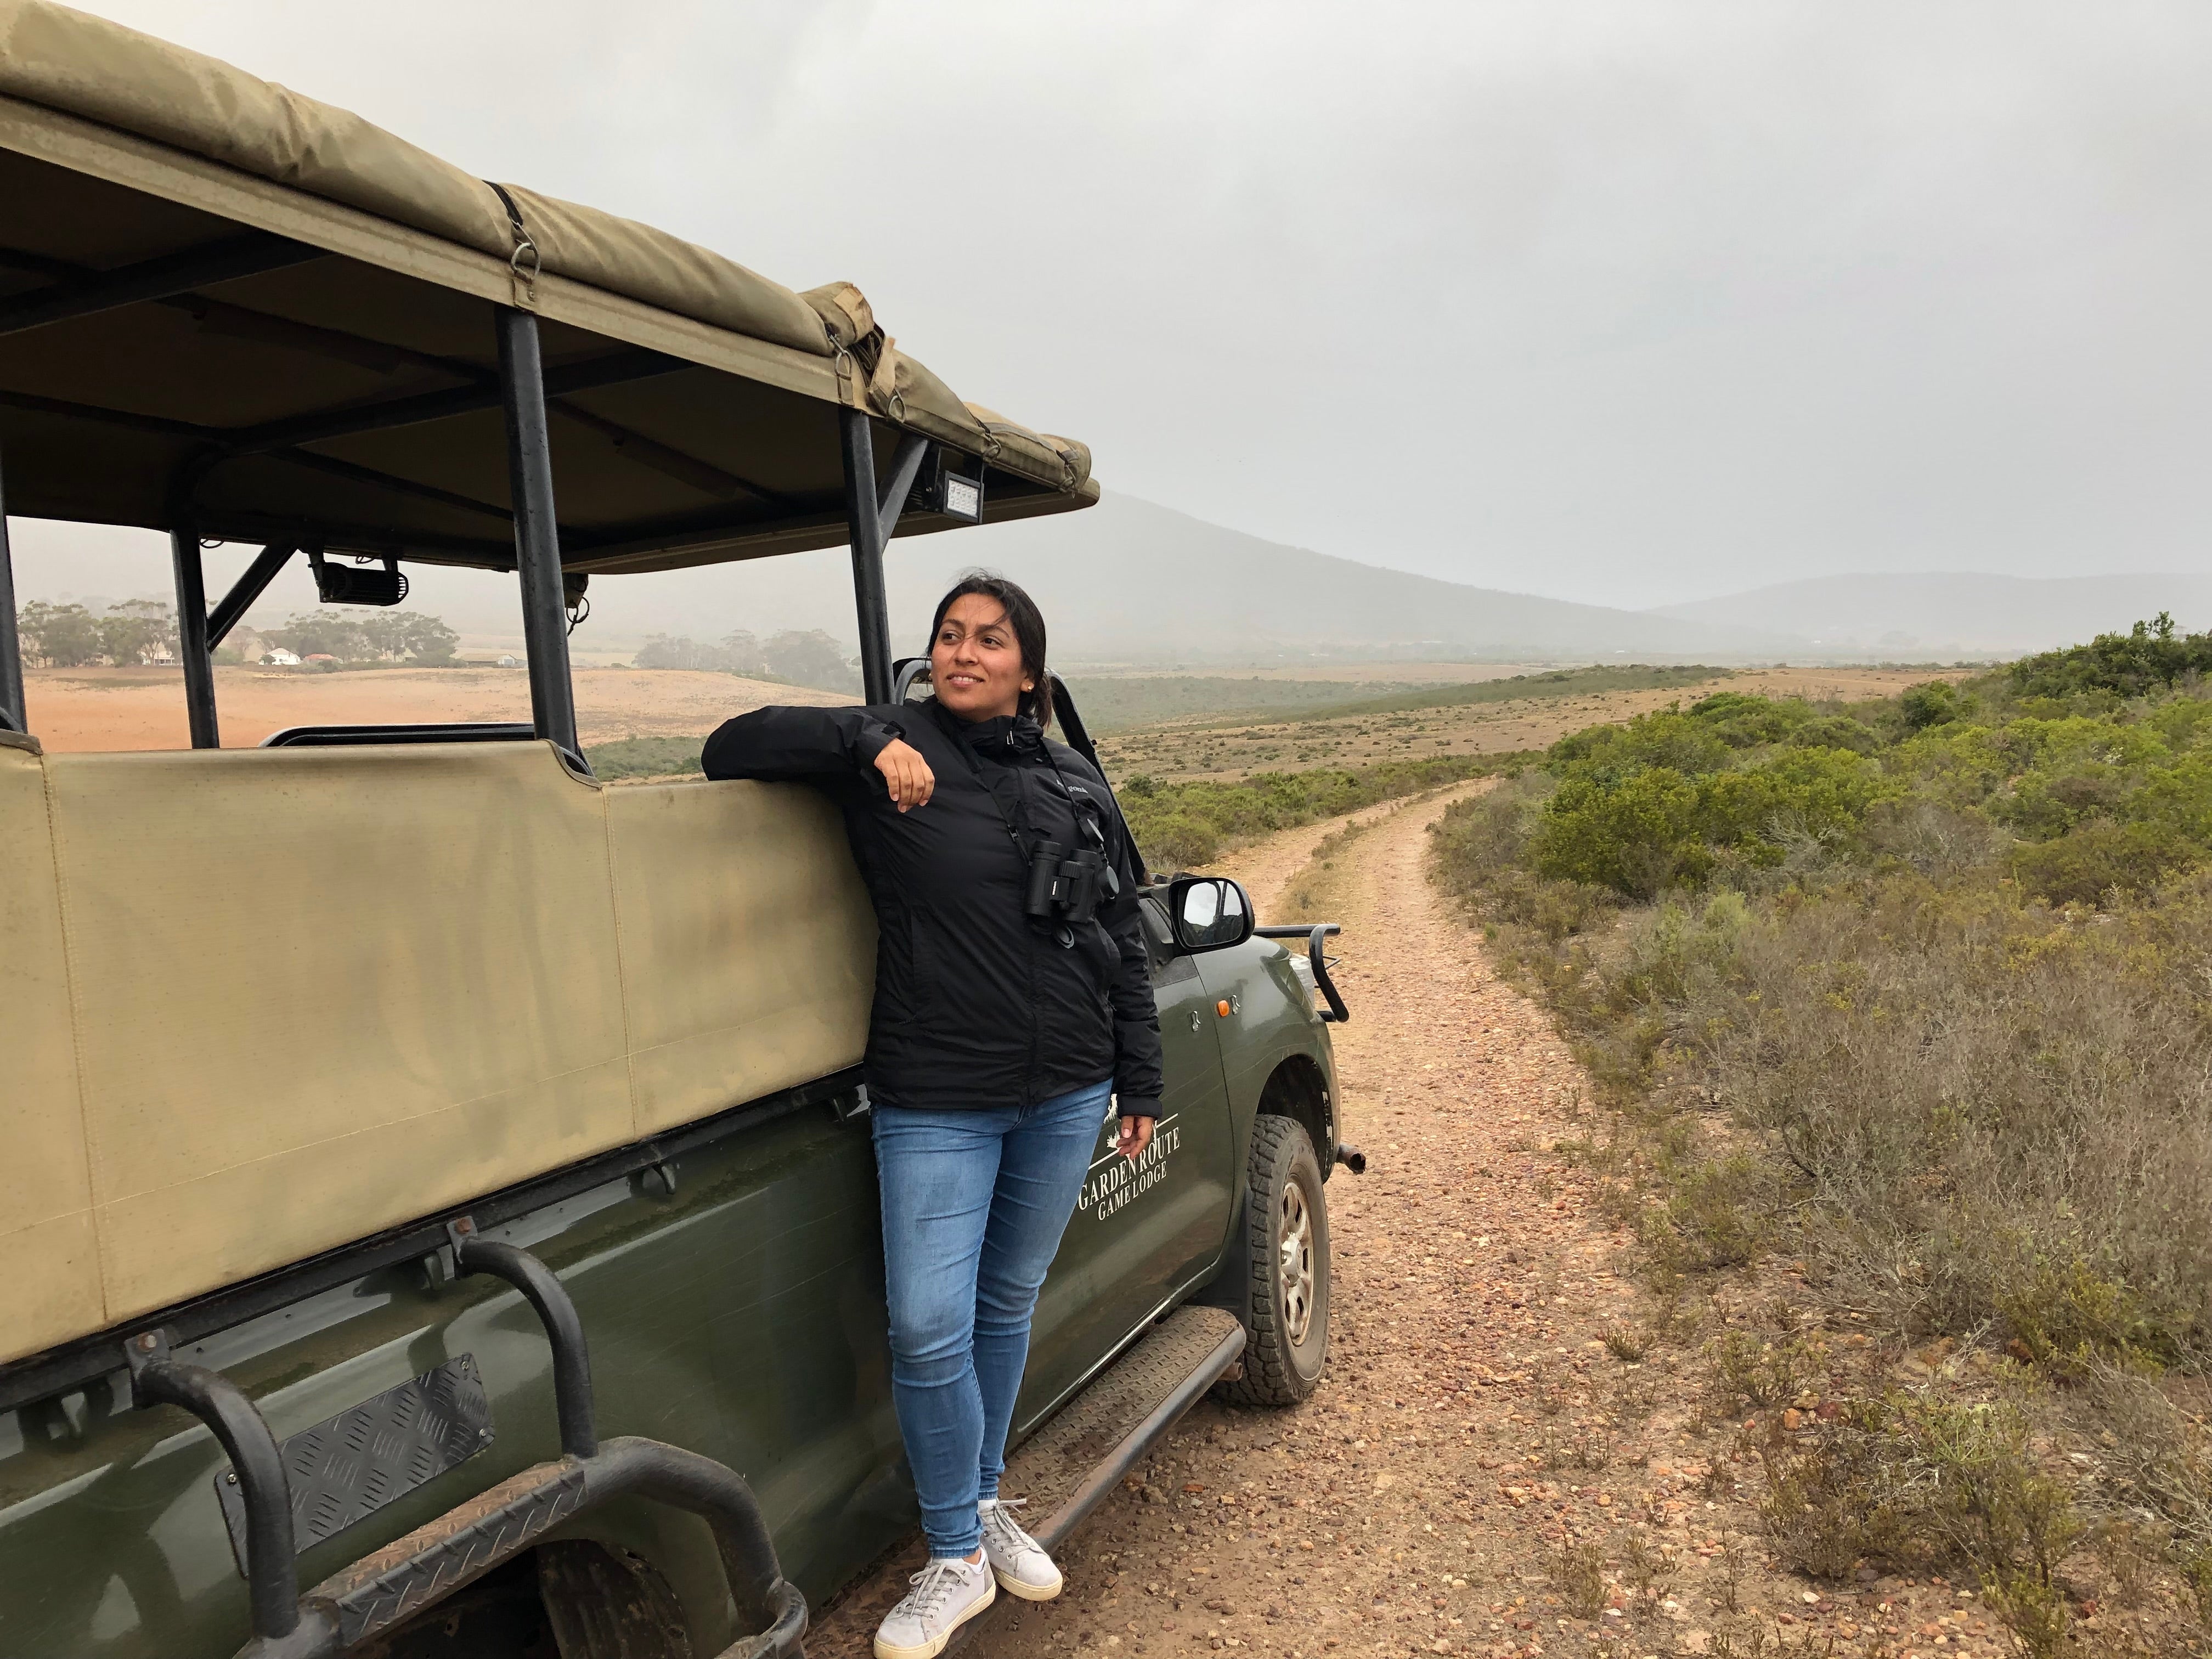 Woman leans against safari vehicle in South Africa